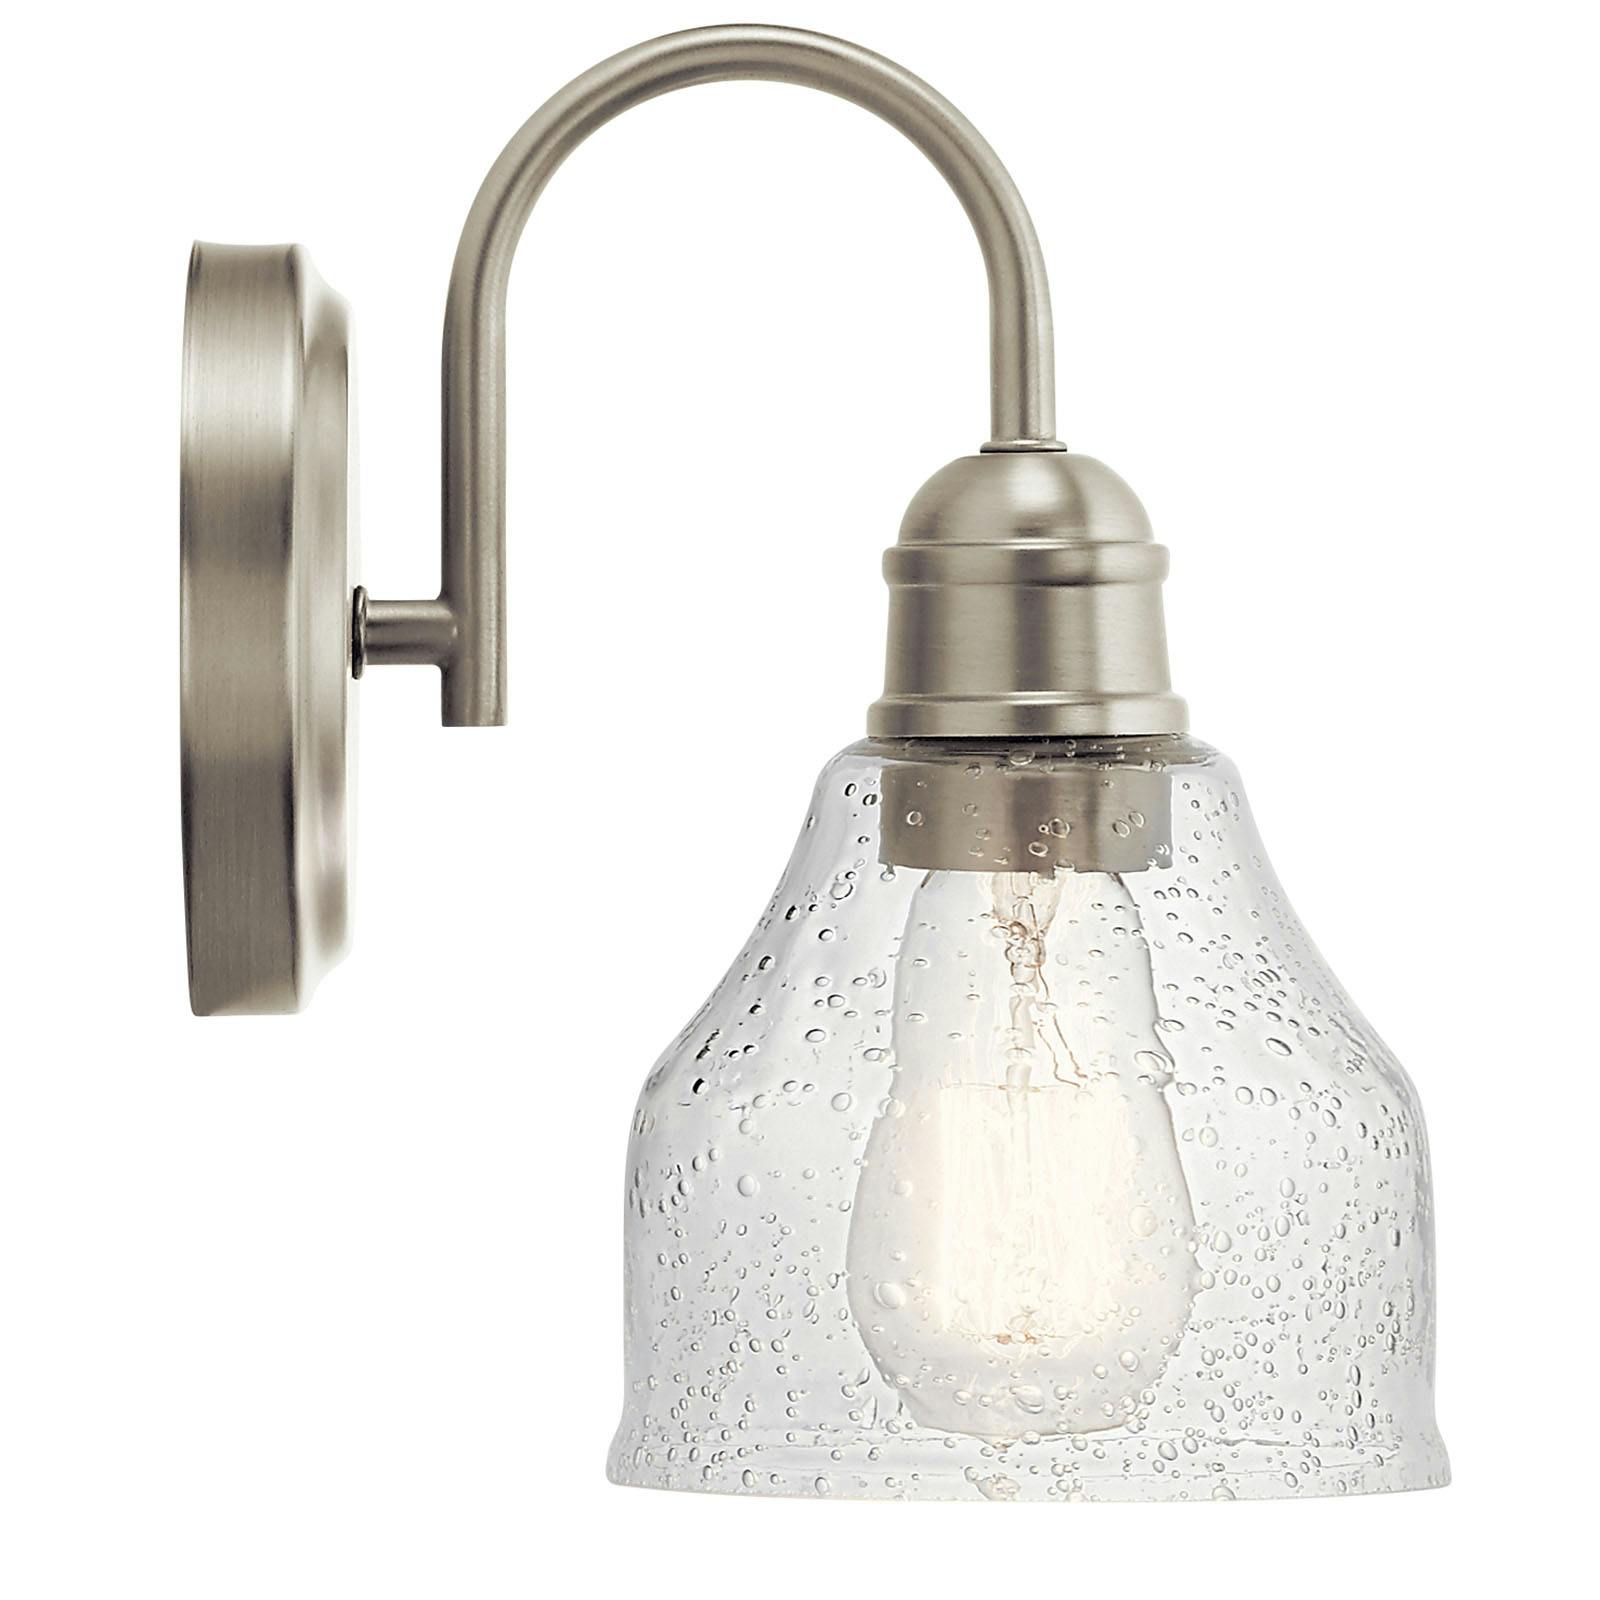 Profile view of the Avery 9.25" 1 Light Vanity Light Nickel on a white background